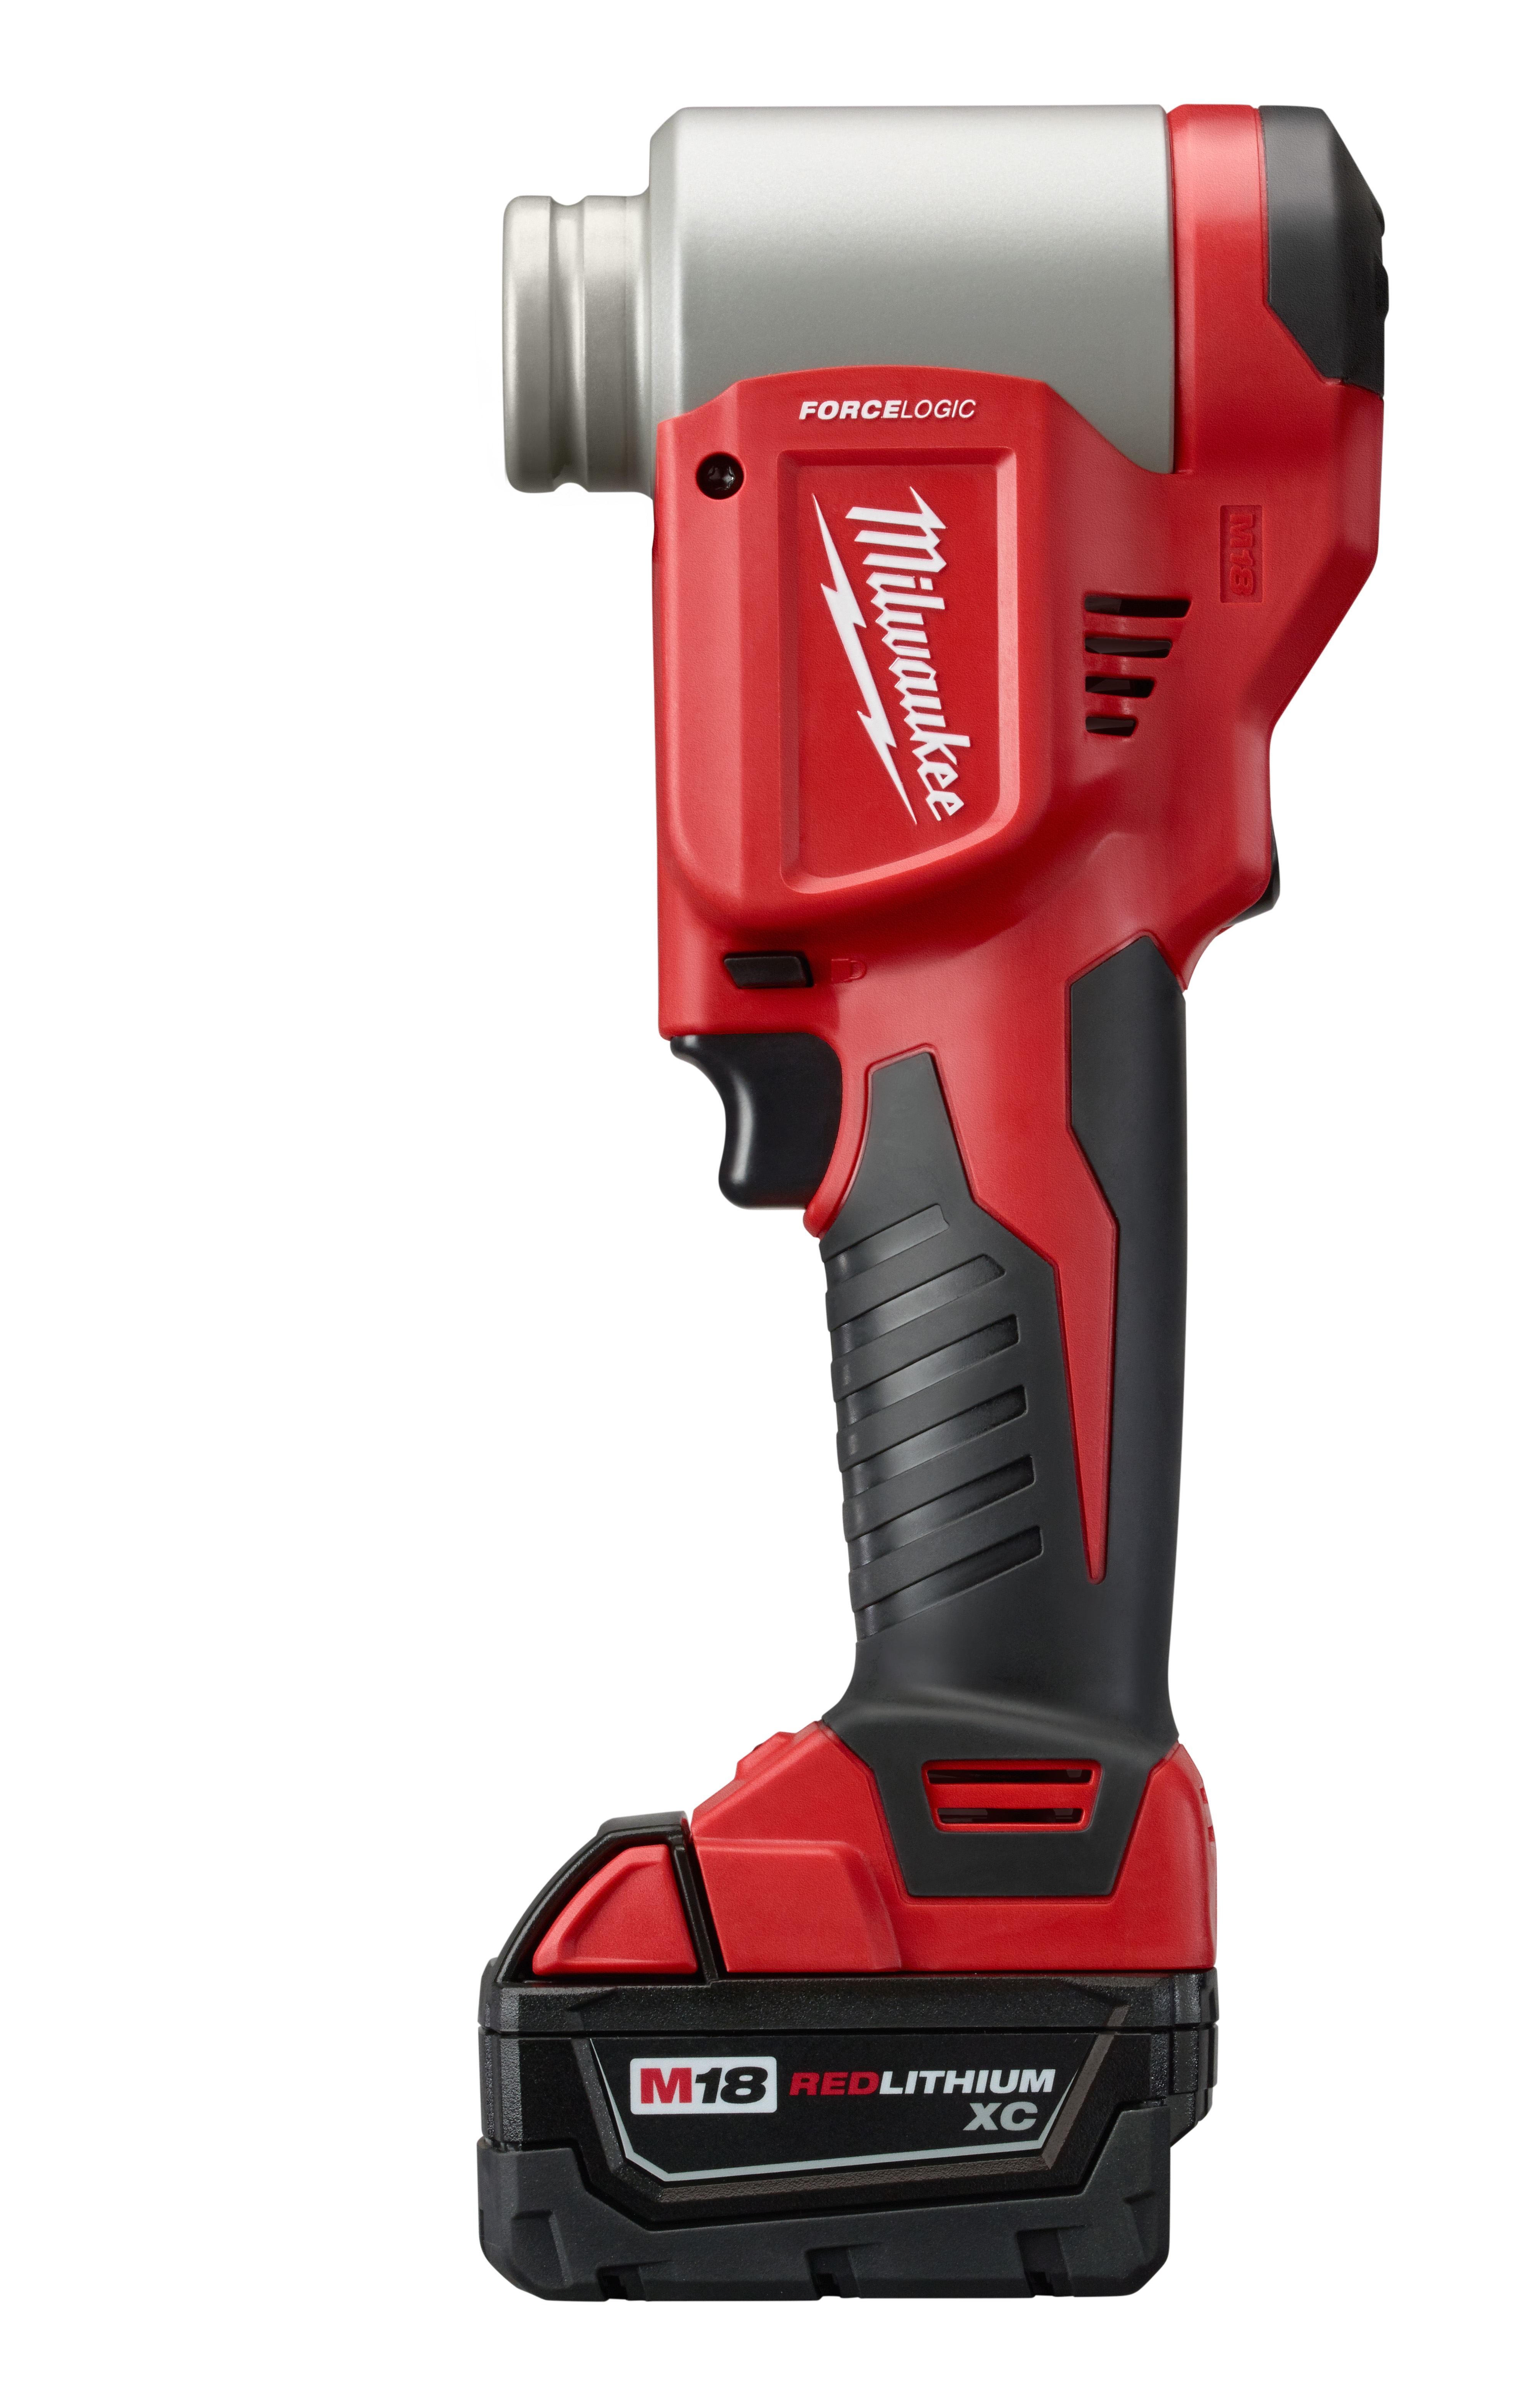 MILWAUKEE 2676-22 Force Logic™, M18™ Knockout Tool Kit 18 V, 1/2 in  (Stainless Steel)